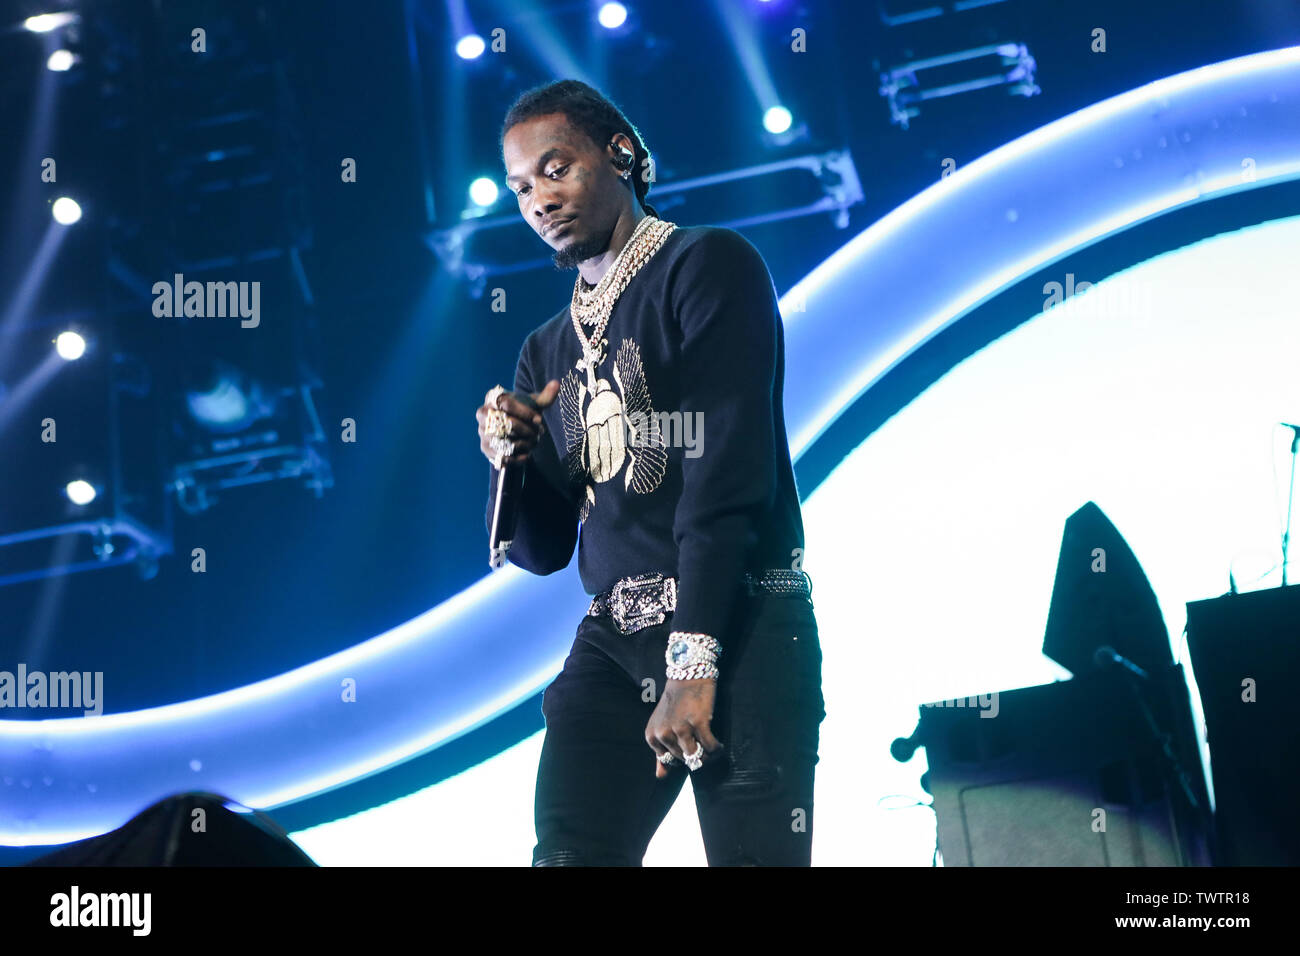 Los Angeles, United States. 22nd June, 2019. LOS ANGELES, CALIFORNIA, USA - JUNE 22: Rapper Offset of Migos performs at the 7th Annual BET Experience At L.A. LIVE Presented By Coca-Cola - Day 3 held at Staples Center on June 22, 2019 in Los Angeles, California, United States. (Photo by Xavier Collin/Image Press Agency) Credit: Image Press Agency/Alamy Live News Stock Photo